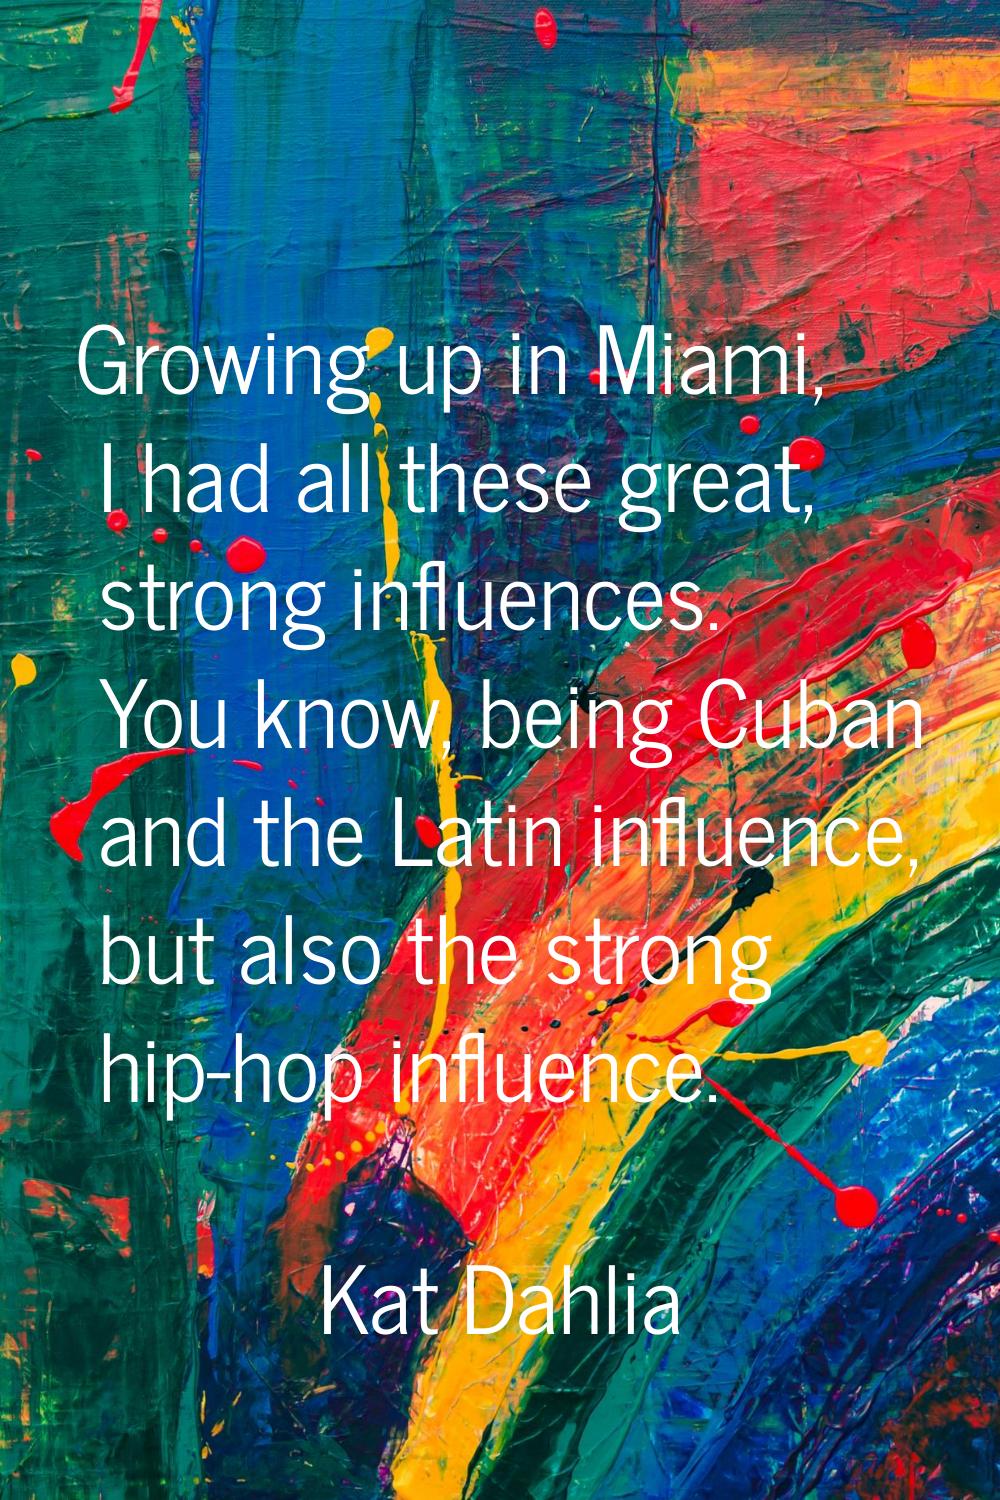 Growing up in Miami, I had all these great, strong influences. You know, being Cuban and the Latin 